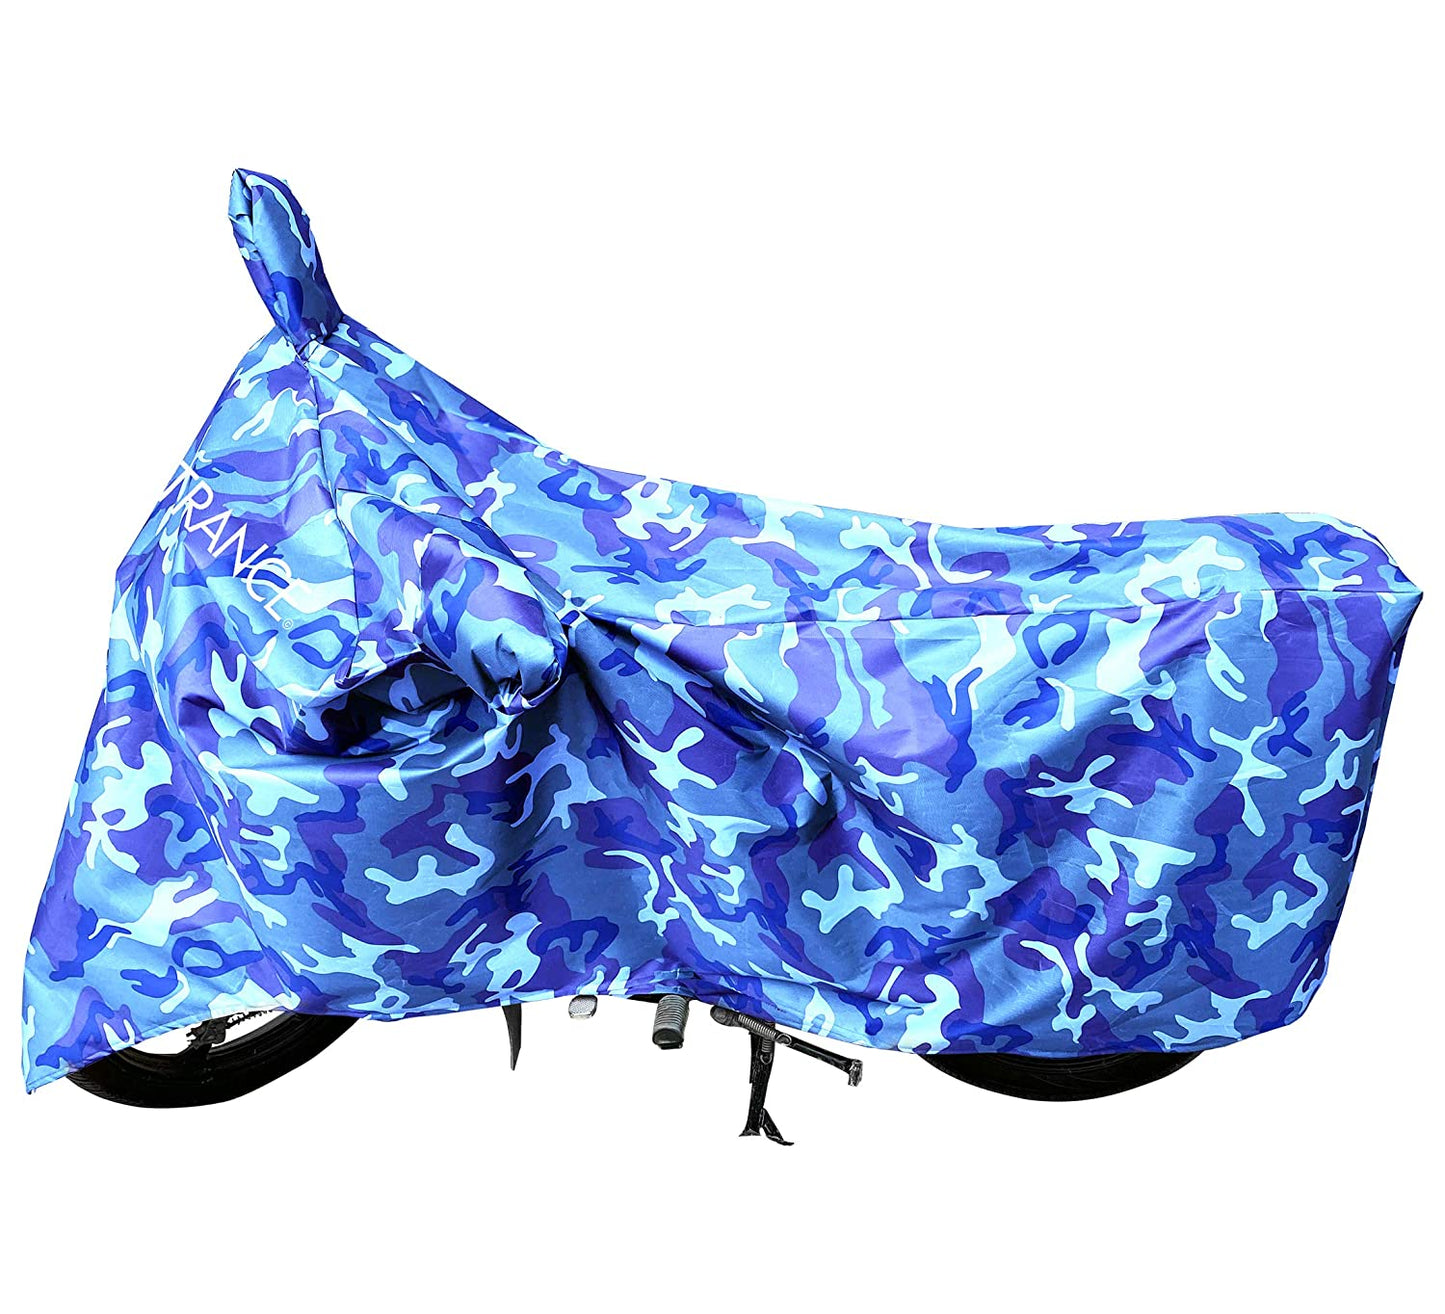 MotoTrance Jungle Bike Body Covers For Bajaj Discover 110 - Interlock-Stitched Waterproof and Heat Resistant with Mirror Pockets